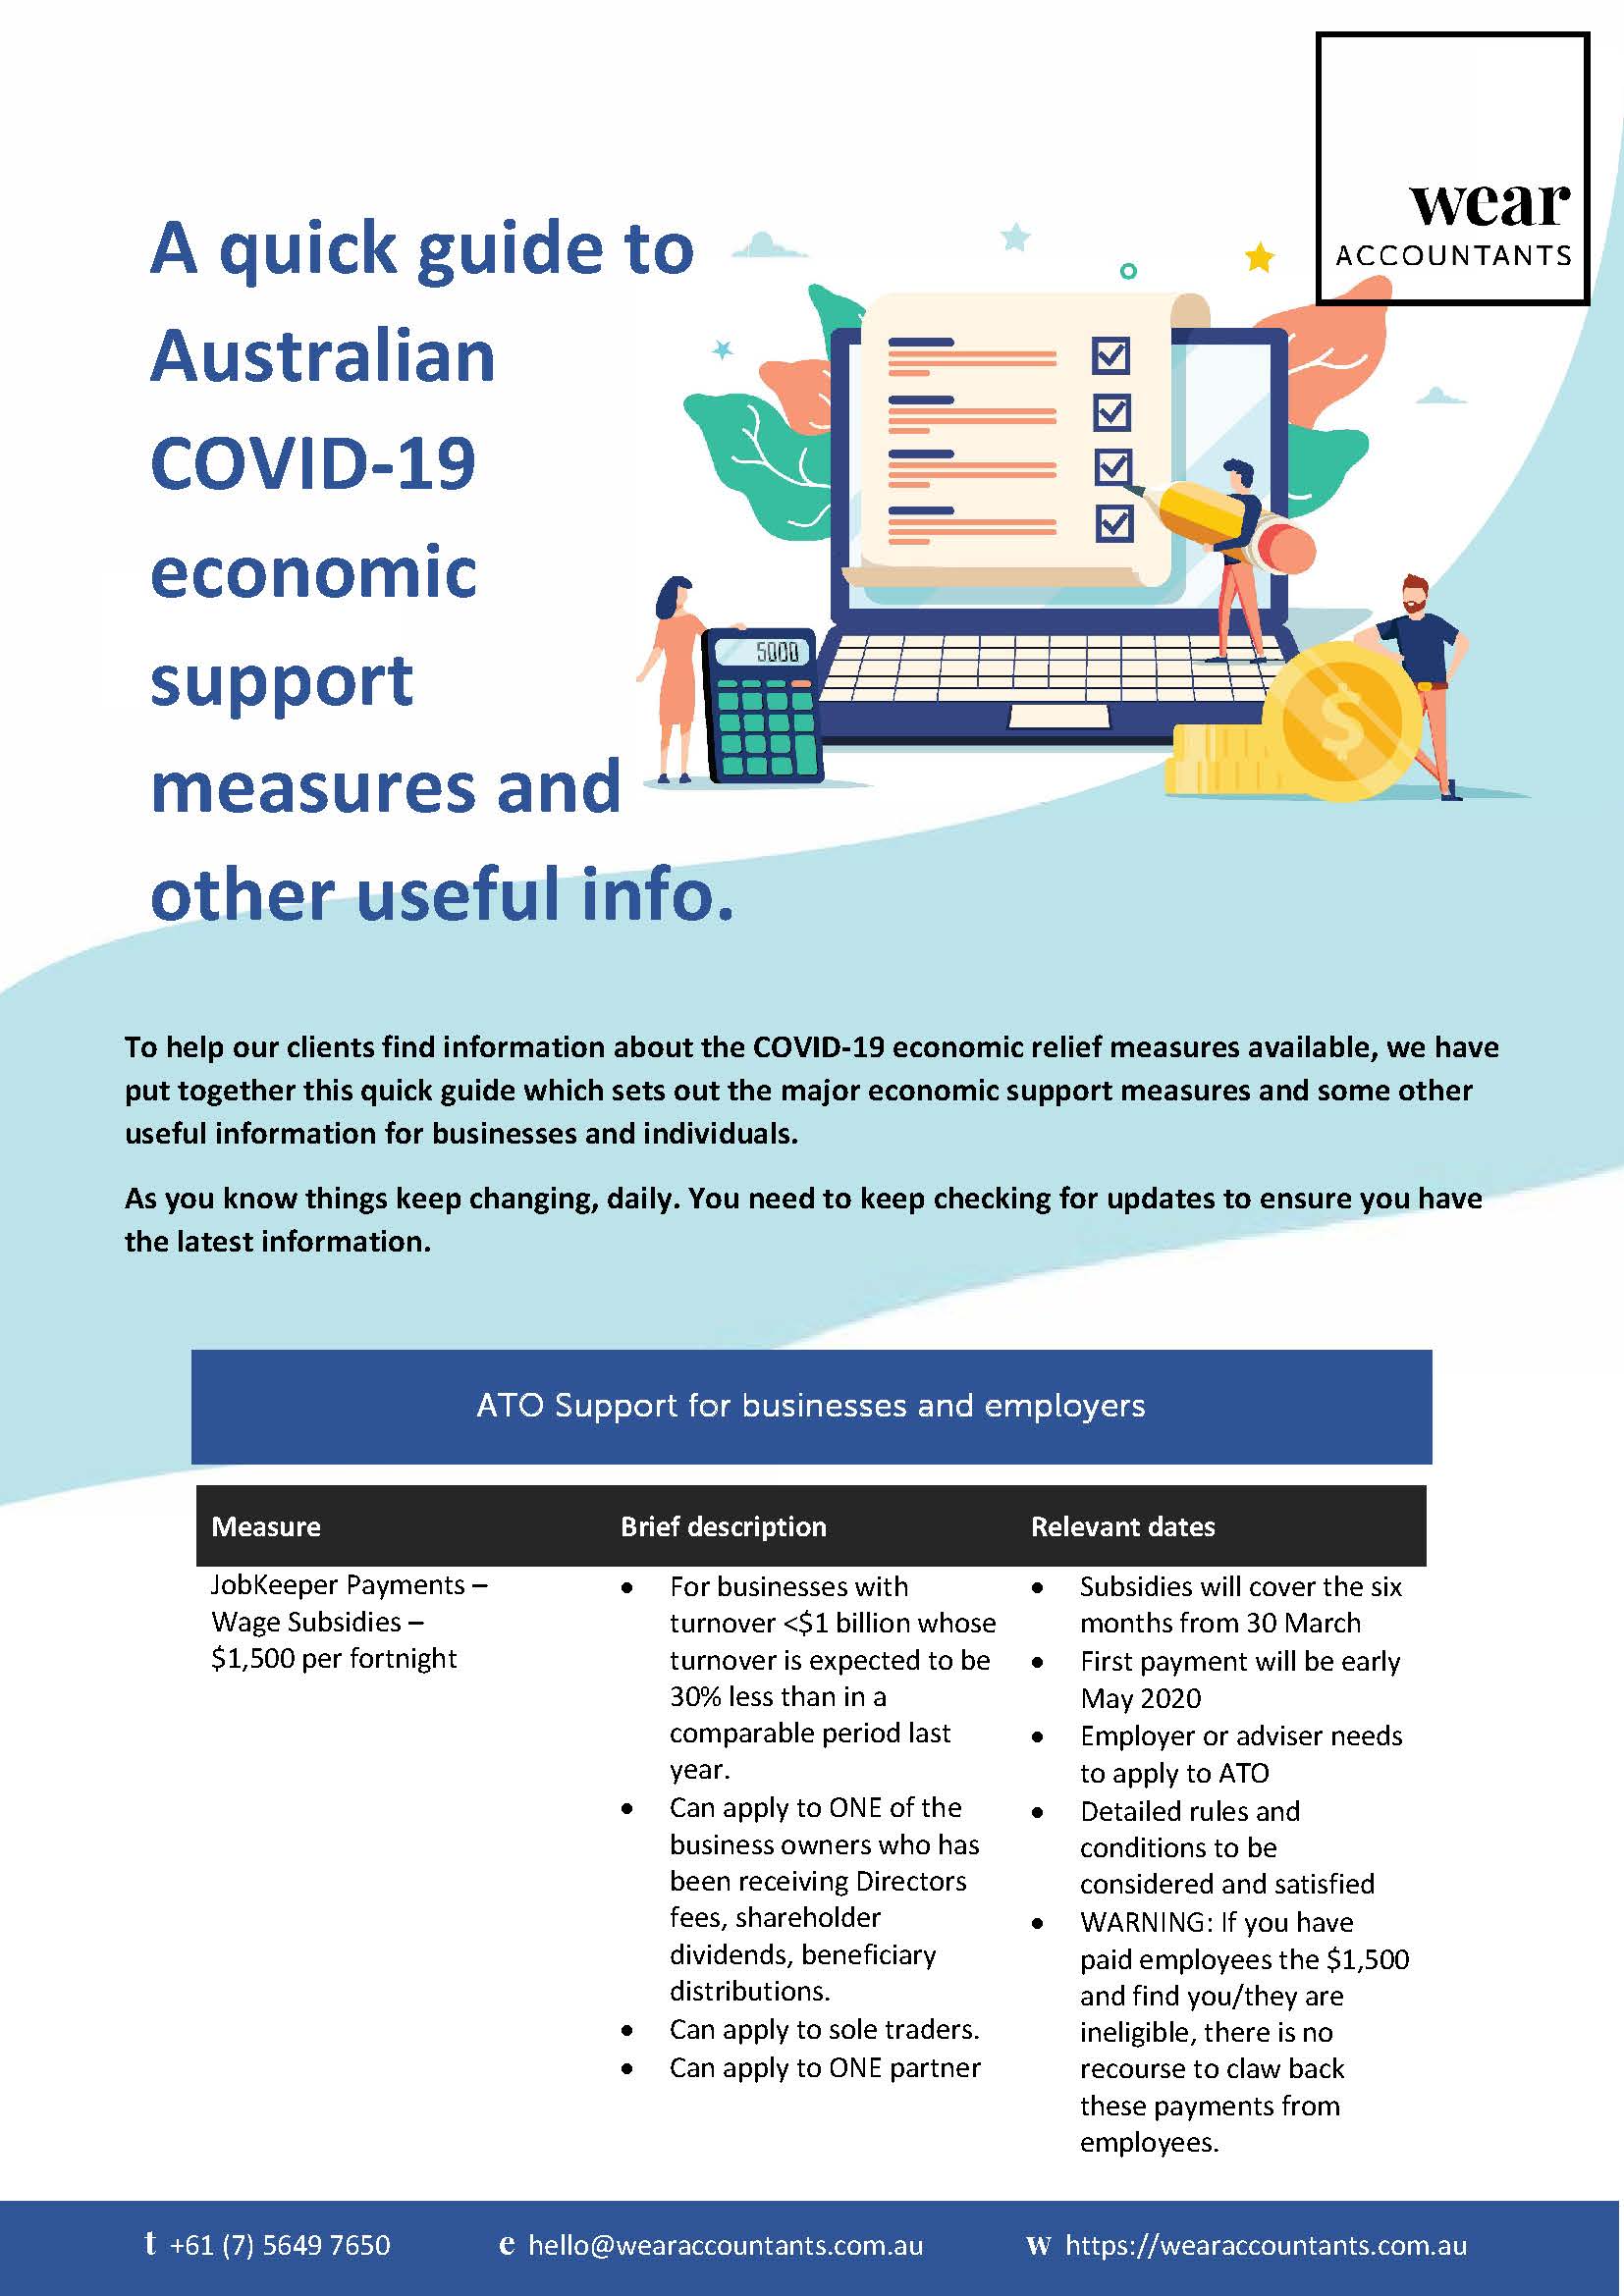 Guide to COVID-19 Support Measures Cover